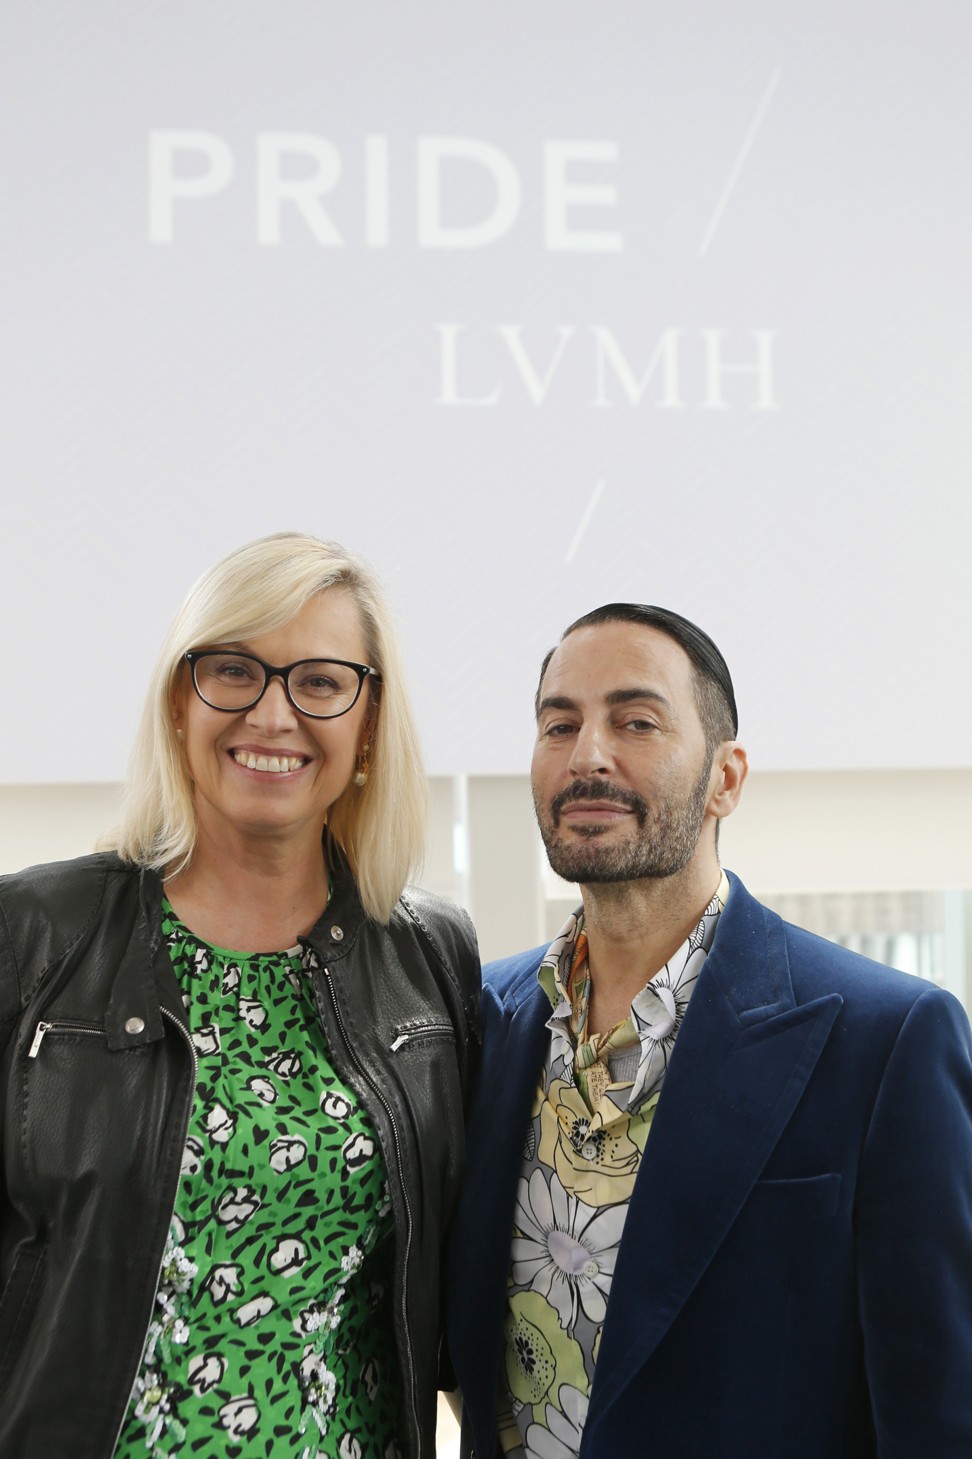 Chantal Gaemperle, LVMH group executive vice-president for human resources and synergies, and designer Marc Jacobs, whose brand belongs to LVMH.